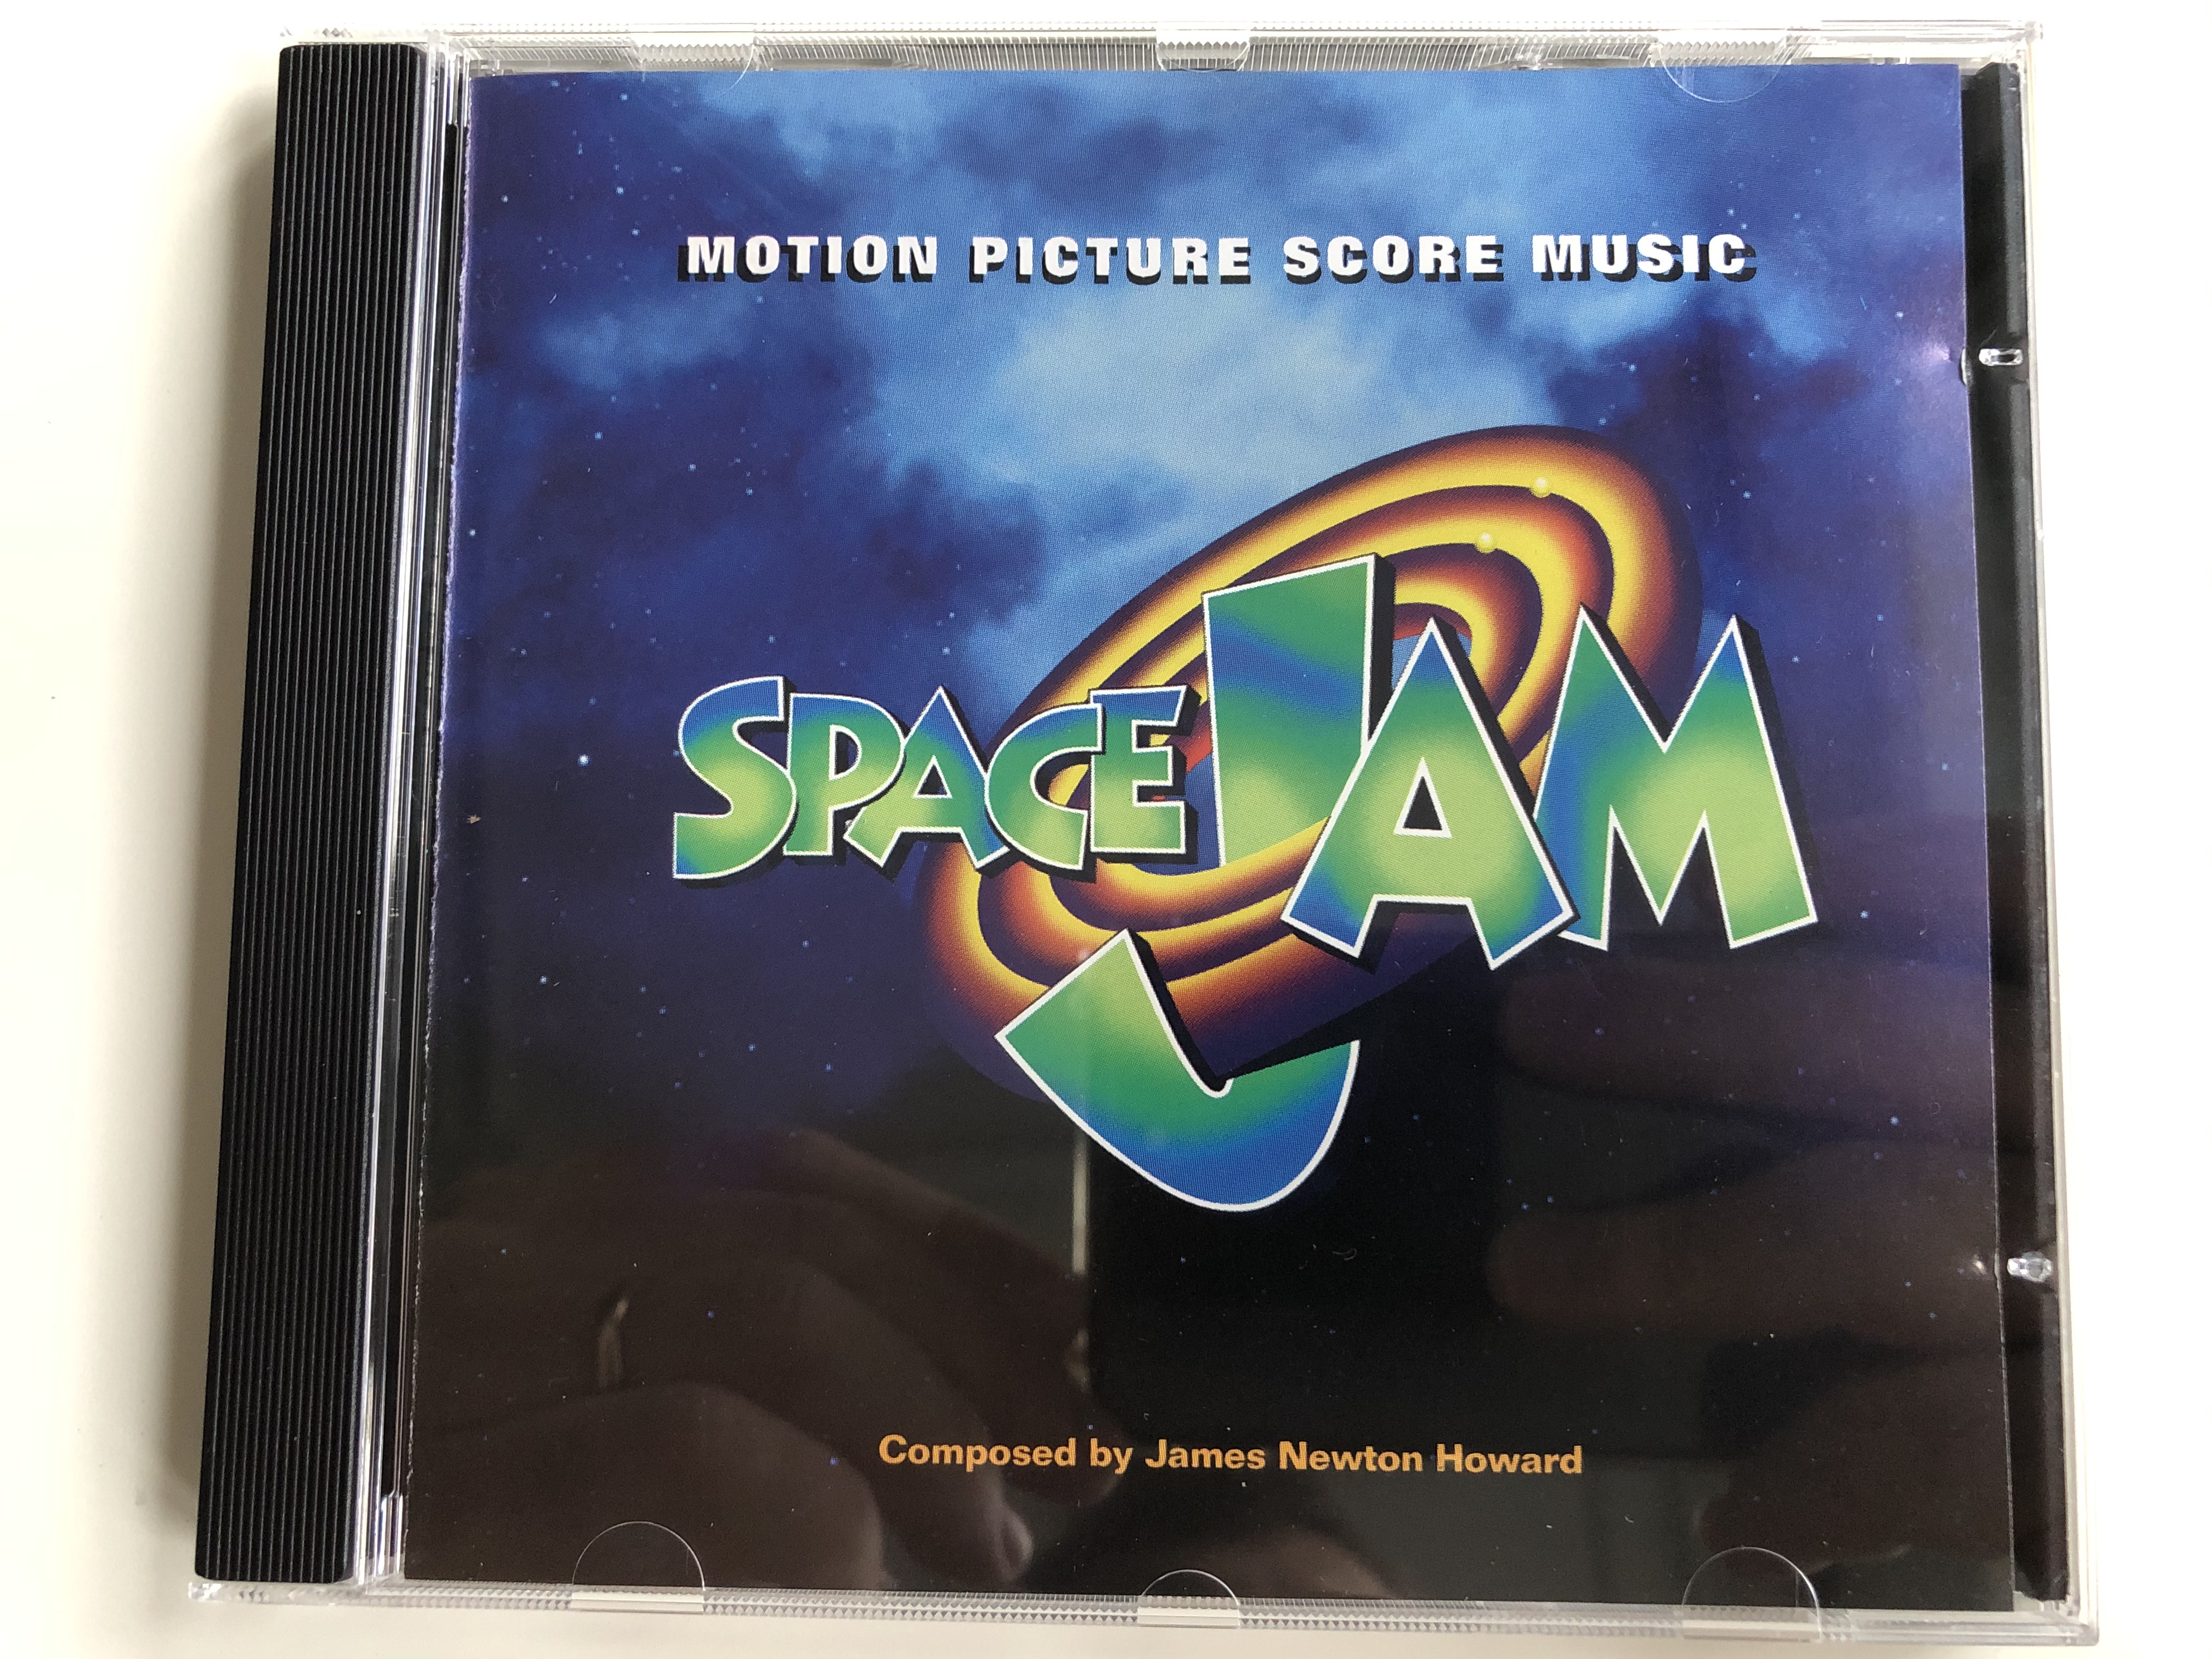 motion-picture-score-music-space-jam-composed-by-james-newton-howard-atlantic-audio-cd-1996-7567-82979-2-1-.jpg